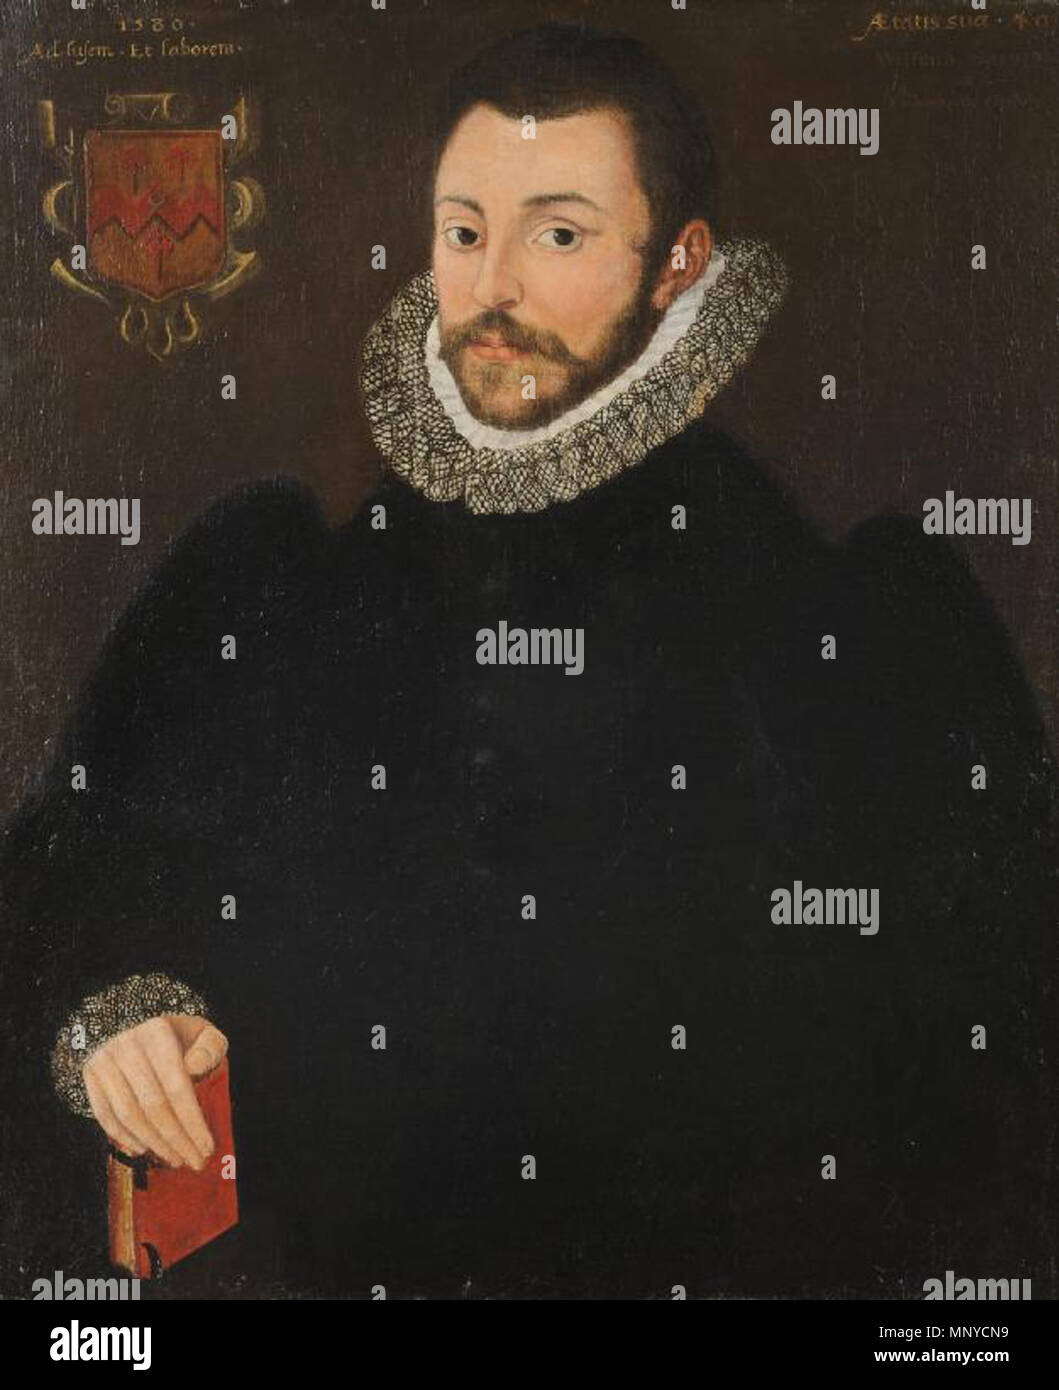 . William Sandys of Conishead Priory . 1580.    Follower of George Gower  (1540–1596)     Alternative names Gower  Description English painter  Date of birth/death circa 1540 1596  Location of birth/death England London  Work period 1570s-1590s  Work location London  Authority control  : Q2126008 VIAF: 65226012 ISNI: 0000 0000 8251 2456 ULAN: 500032228 LCCN: nr00039827 GND: 135583837 WorldCat 1267 William Sandys Of Conishead Priory, Aged 40 Stock Photo